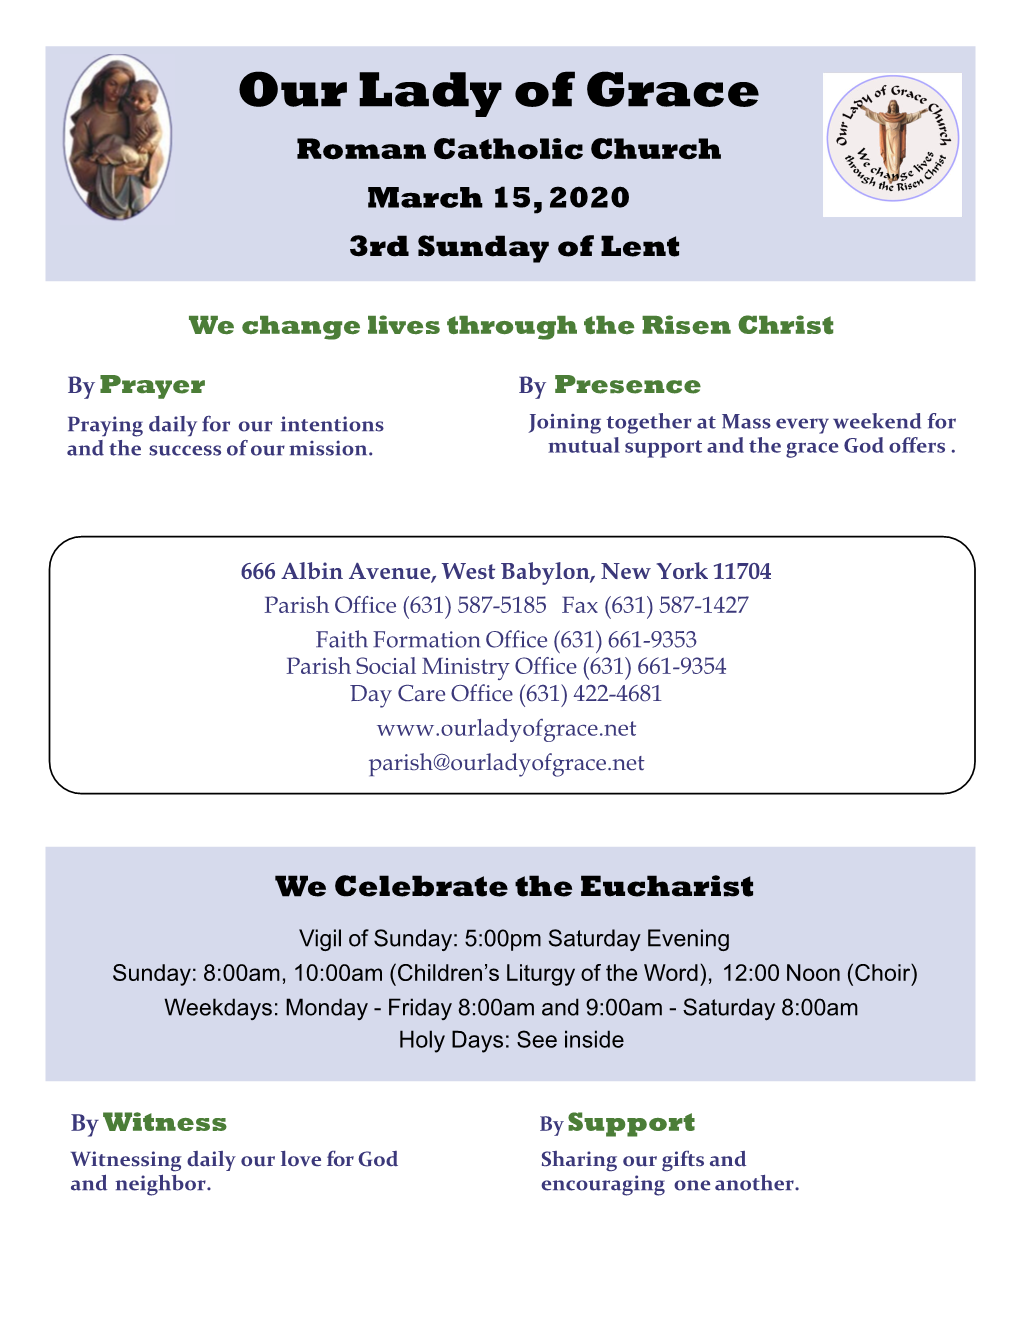 Our Lady of Grace Roman Catholic Church March 15, 2020 3Rd Sunday of Lent